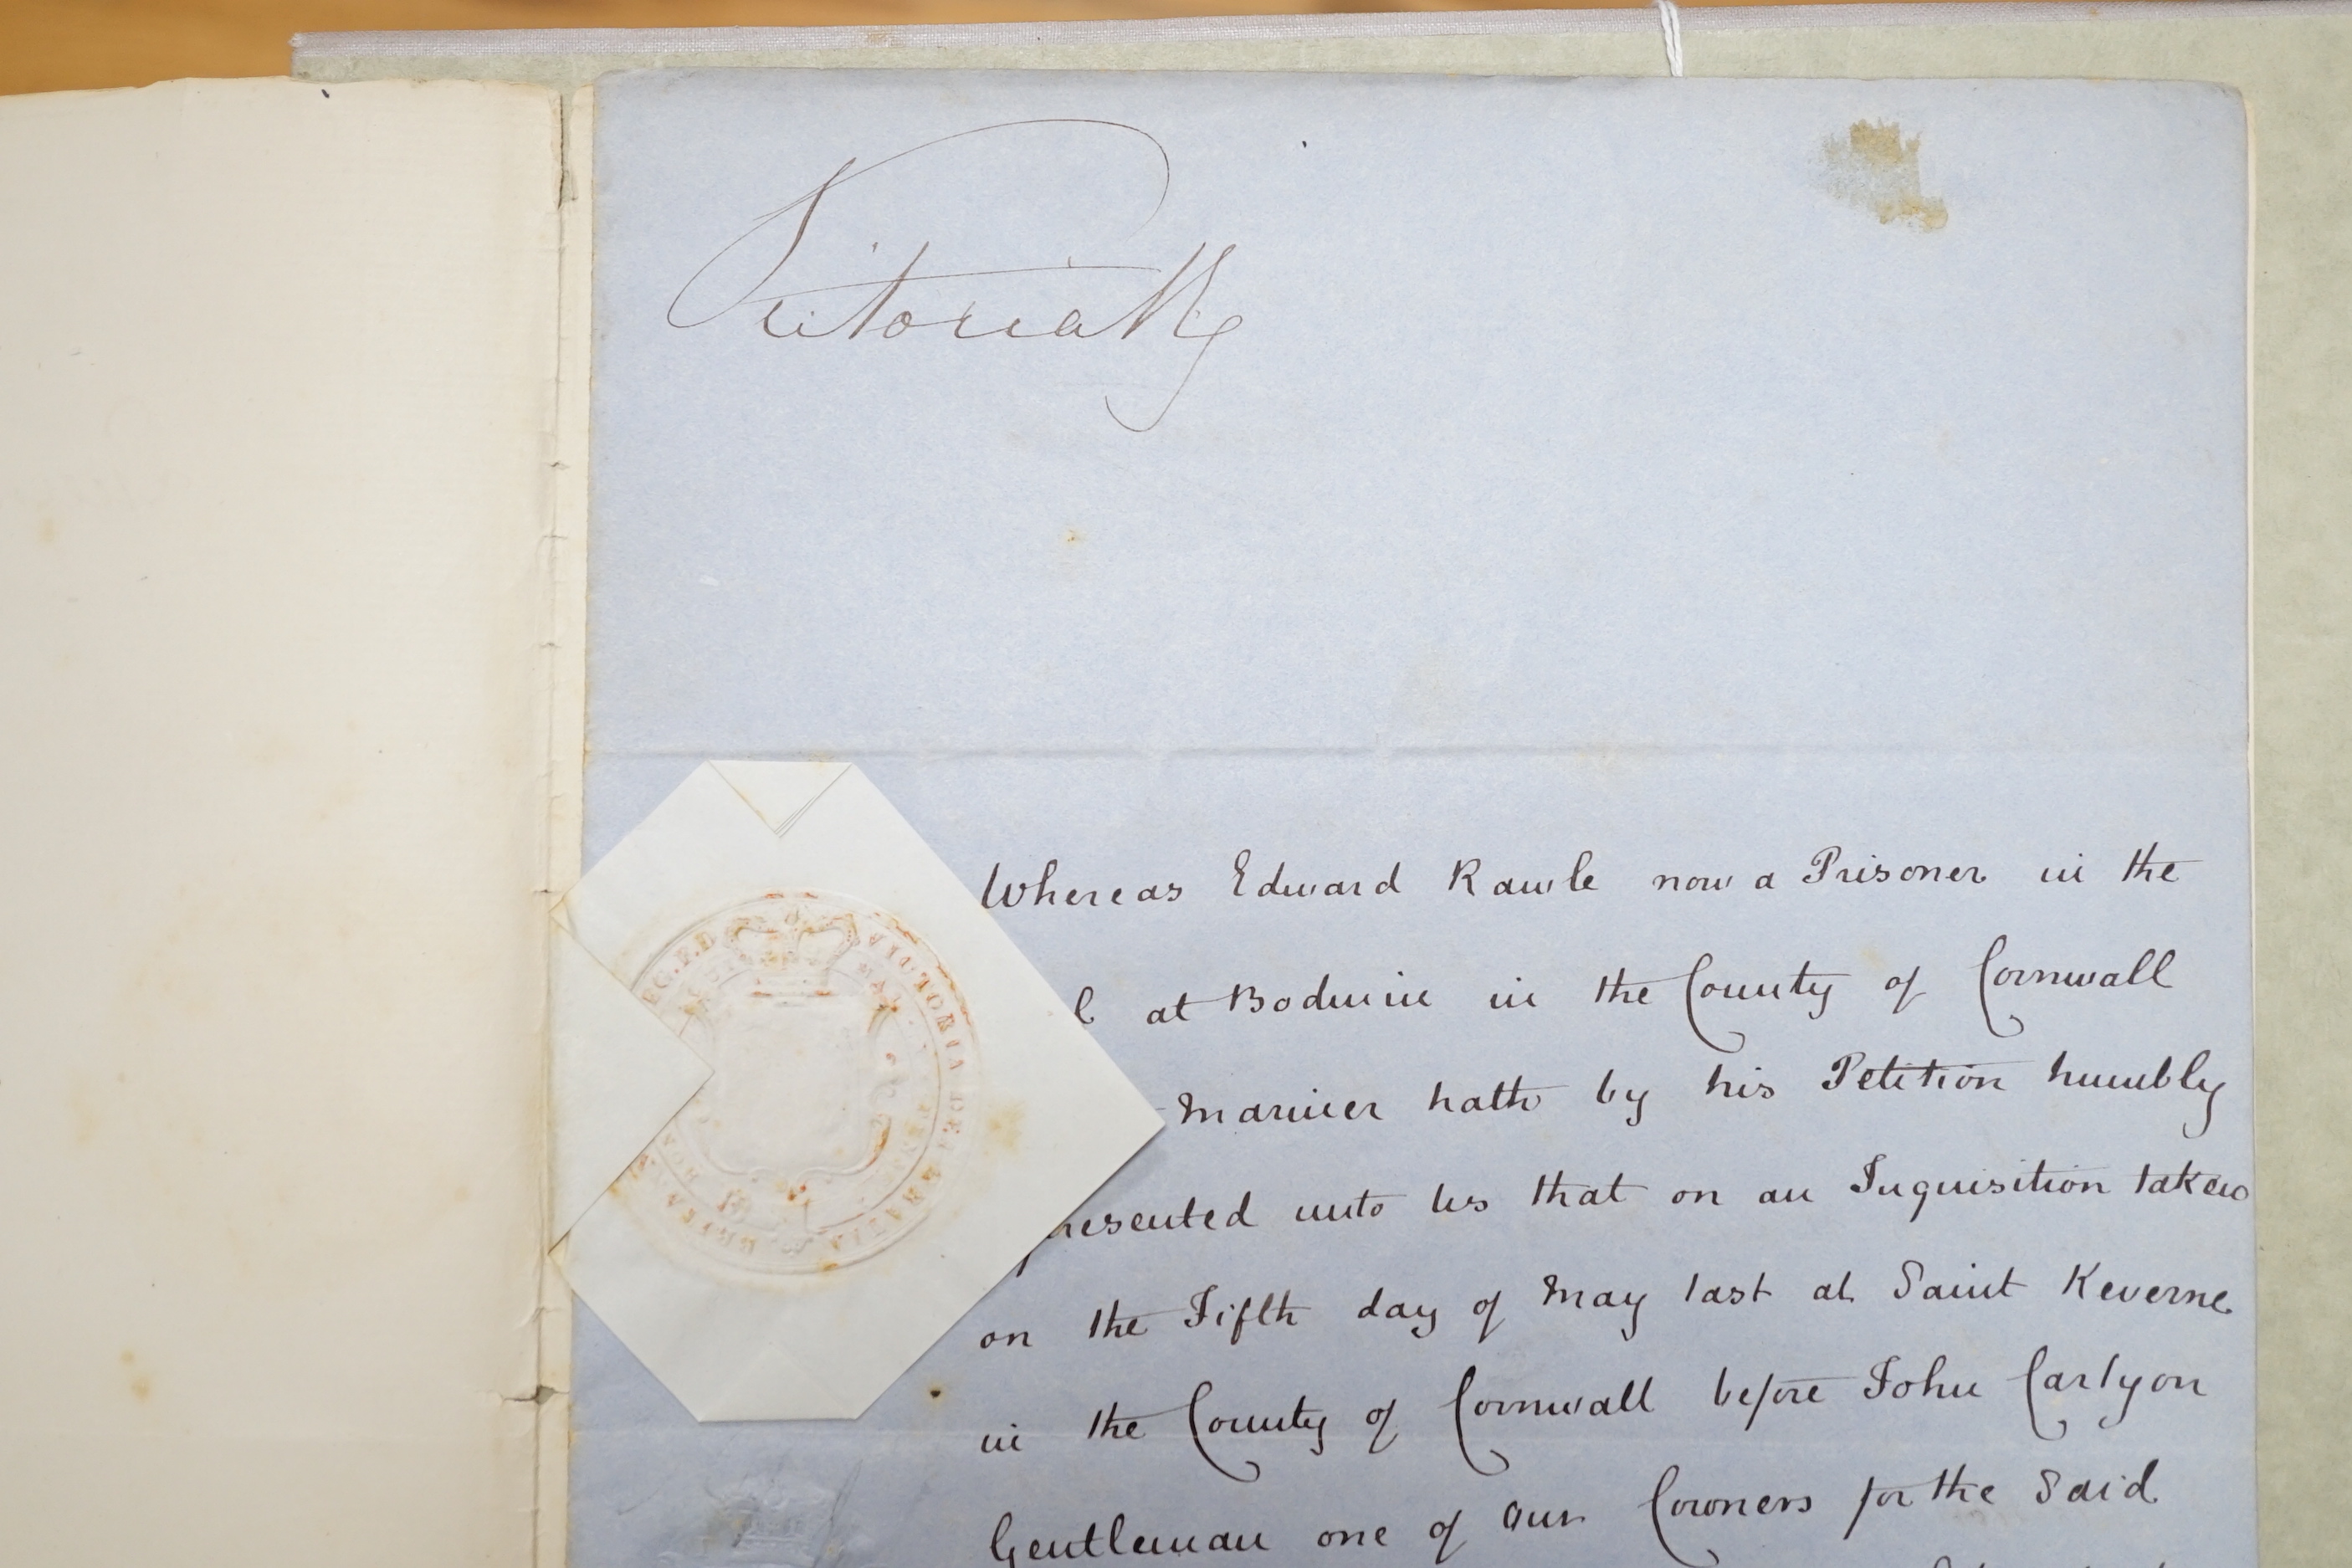 A handwritten licence to plead to Frederick William Slade, dated 31 July 1855, countersigned by Queen Victoria